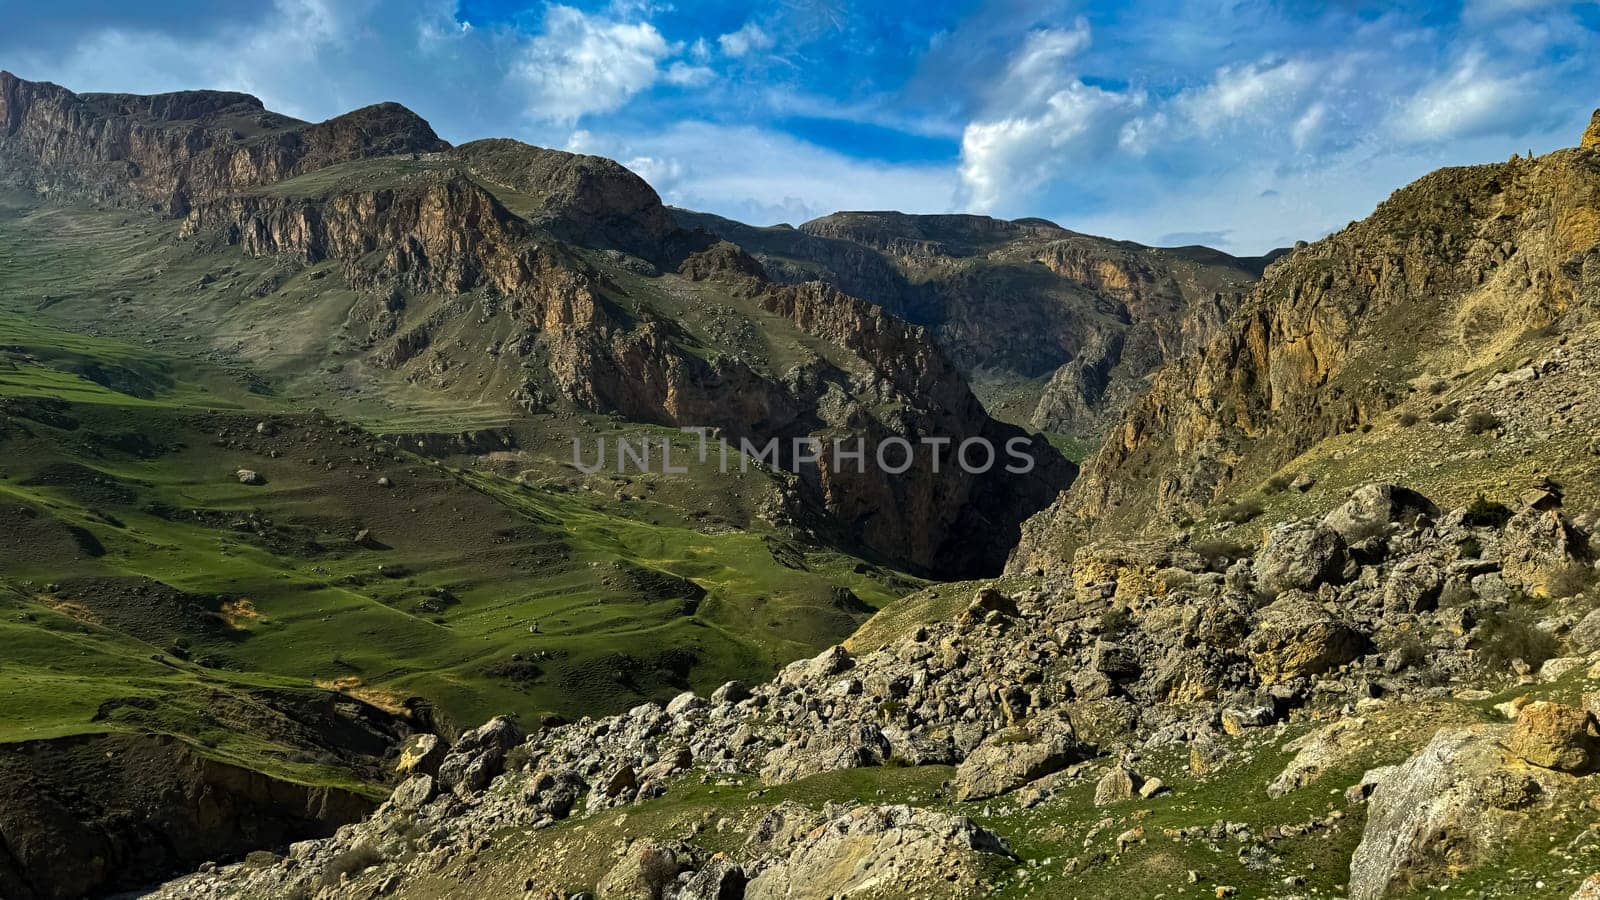 Mountain landscape with green valleys, rugged cliffs under blue sky with clouds. For advertising banner or post card of outdoor adventure and travel themes. by Lunnica